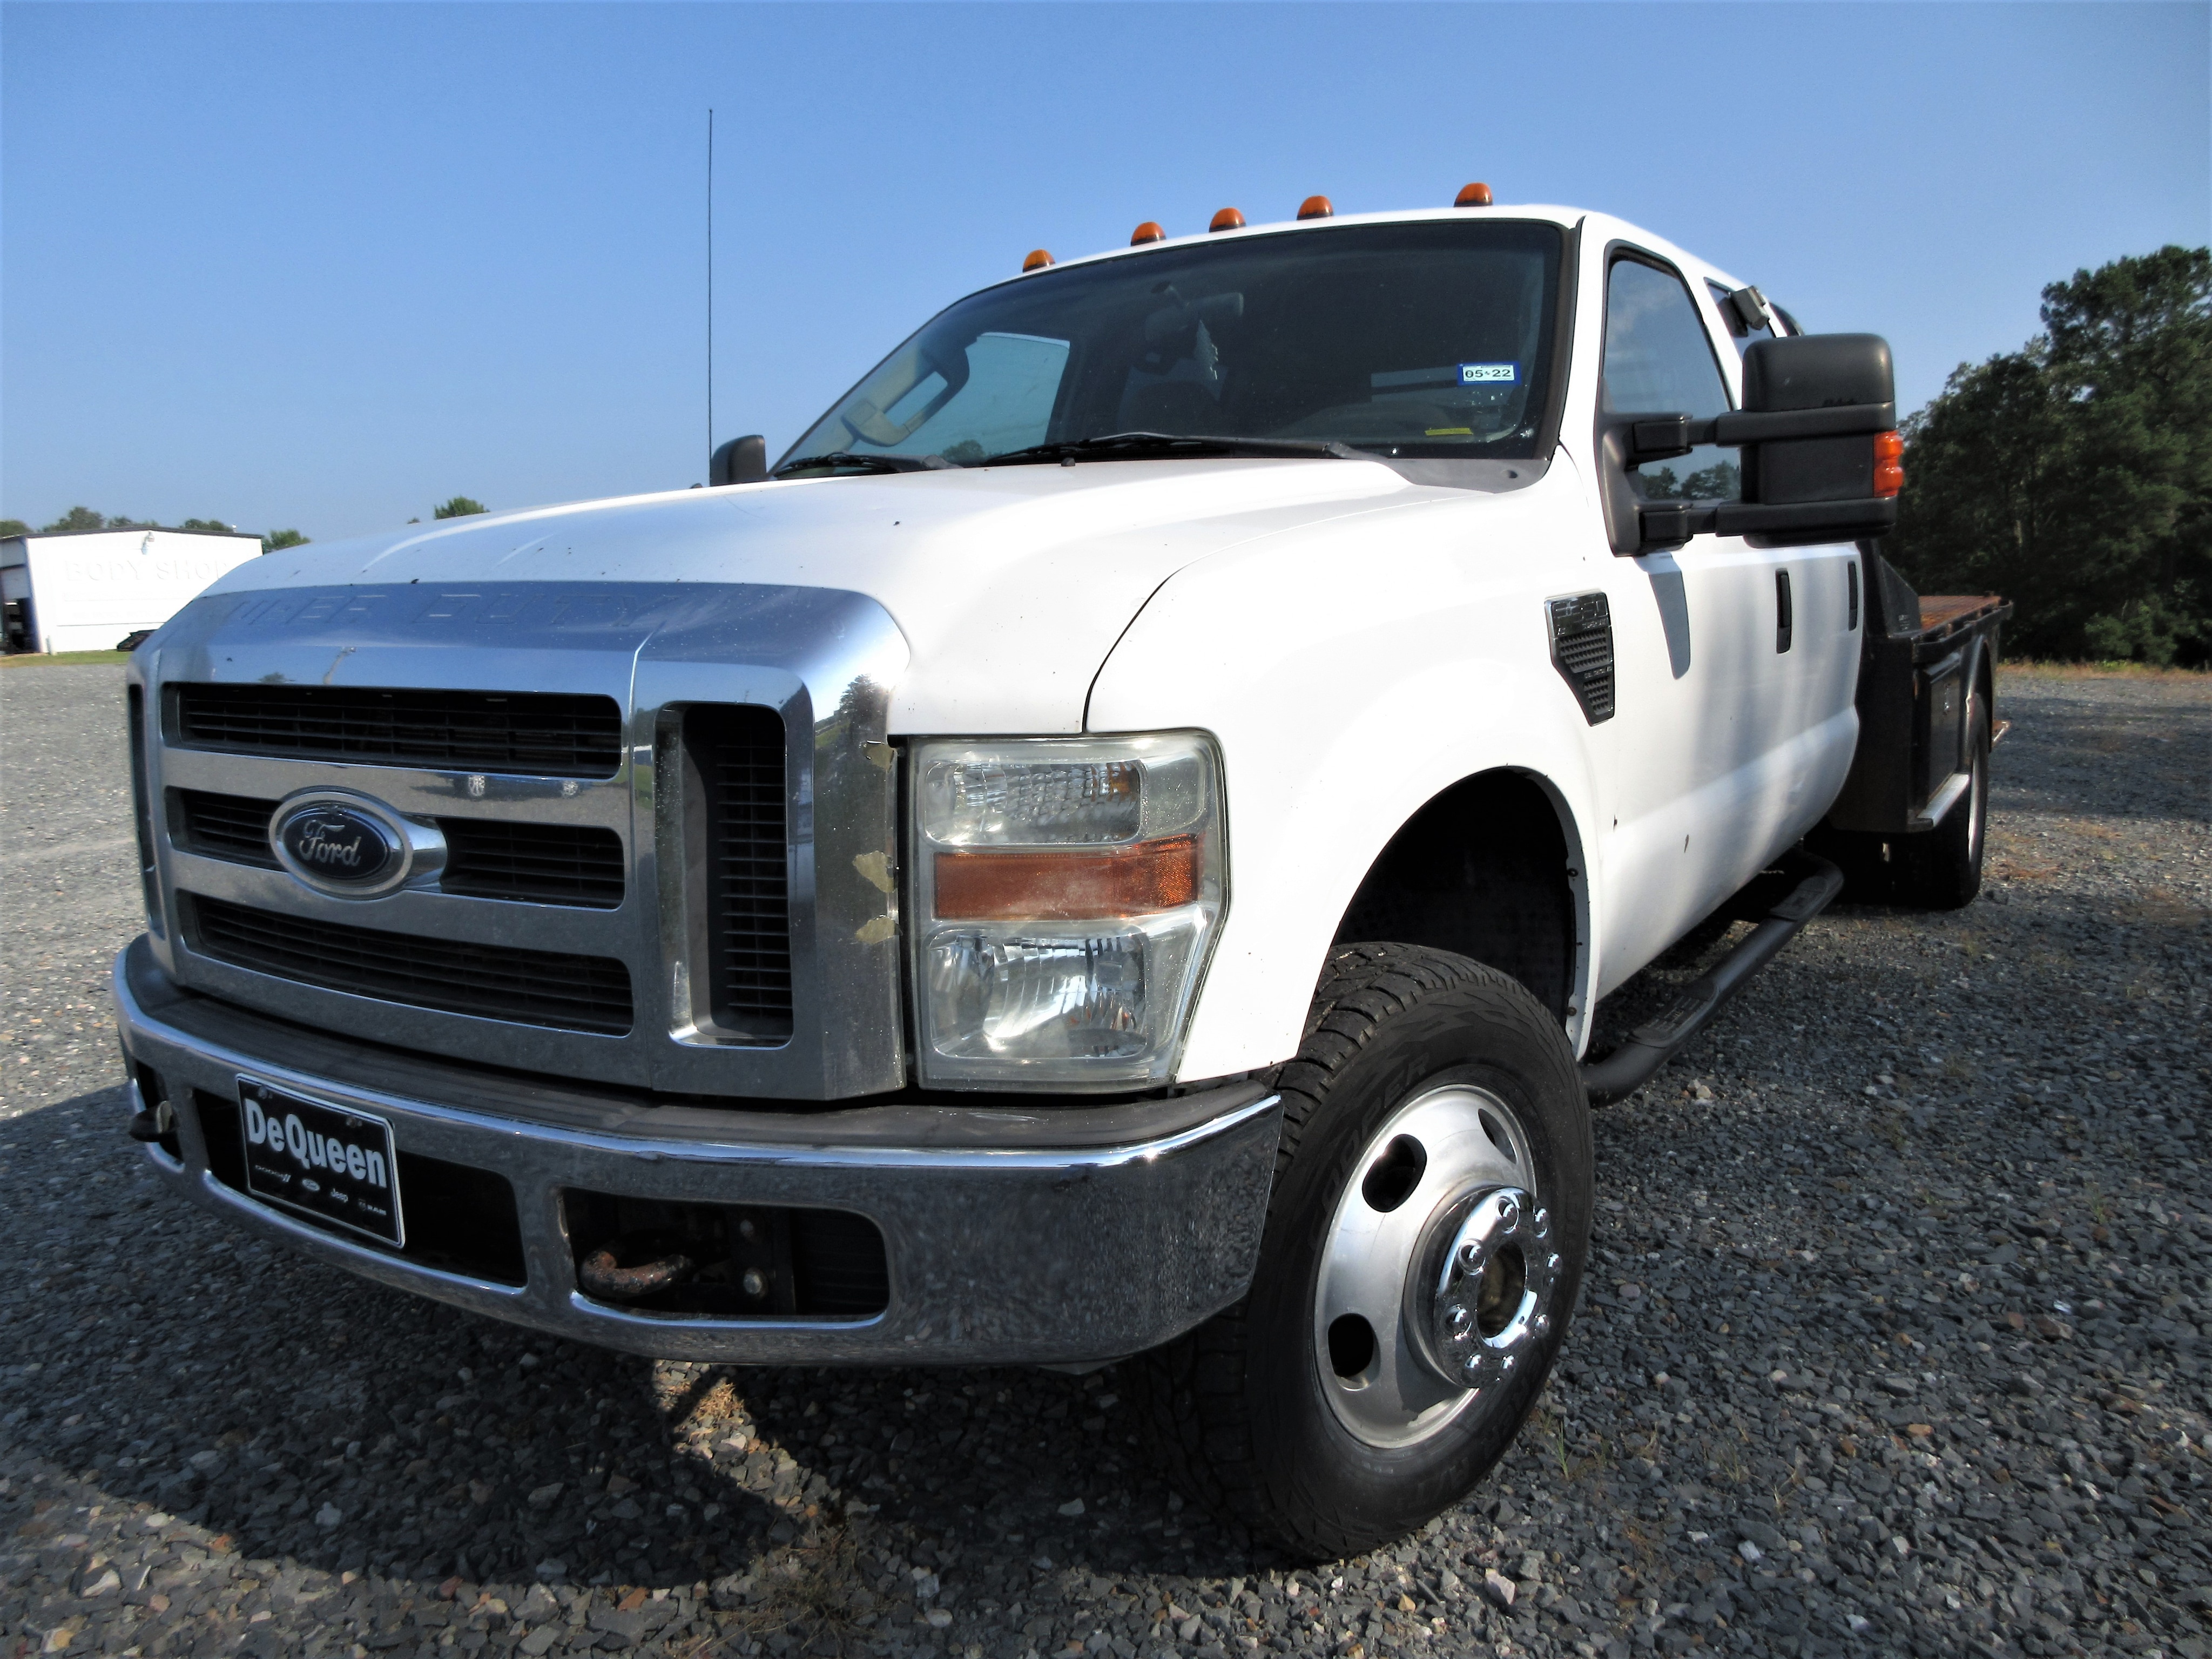 Used 2008 Ford Super Duty F-350 DRW For Sale at De Queen Ford Inc. | VIN:  1FDWW37Y28EA52830